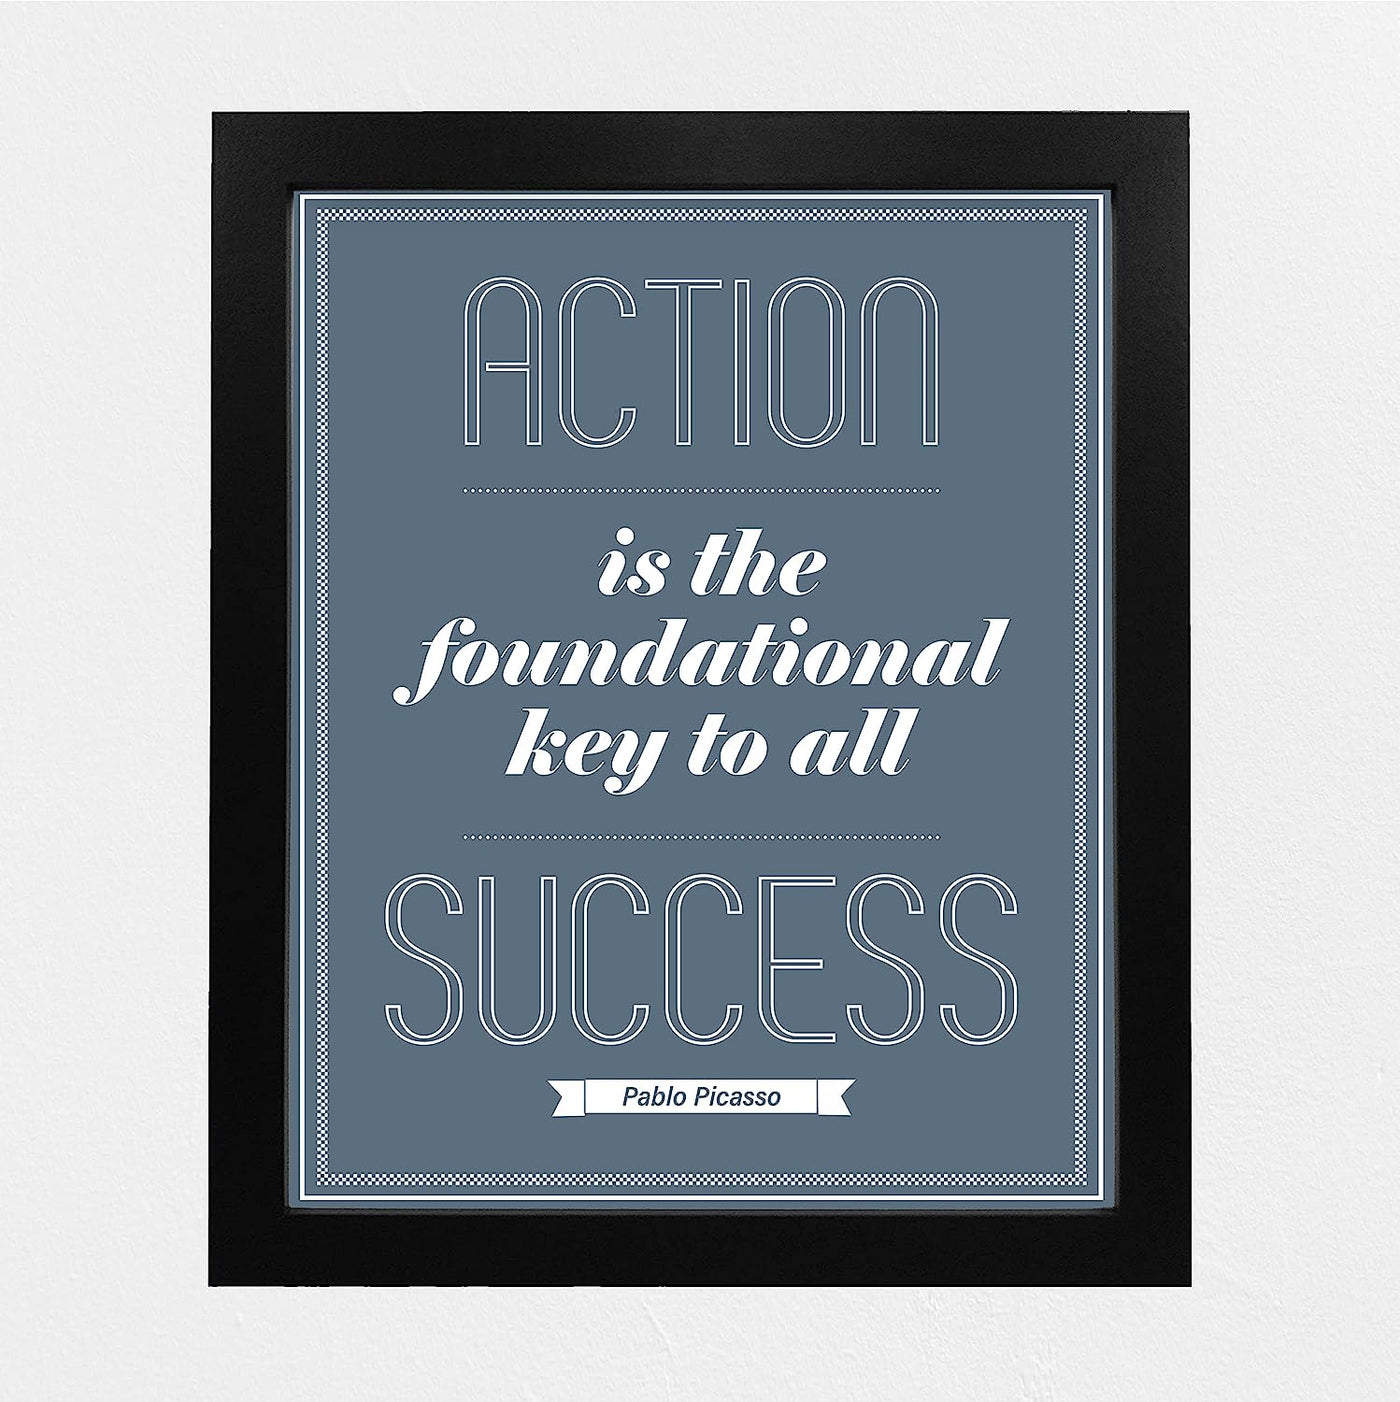 Pablo Picasso Quotes-"Action Is the Foundational Key to All Success" Motivational Wall Art-8 x 10" Modern Typographic Print-Ready to Frame. Inspirational Decor for Home-Office-Work-Gym-School Decor!